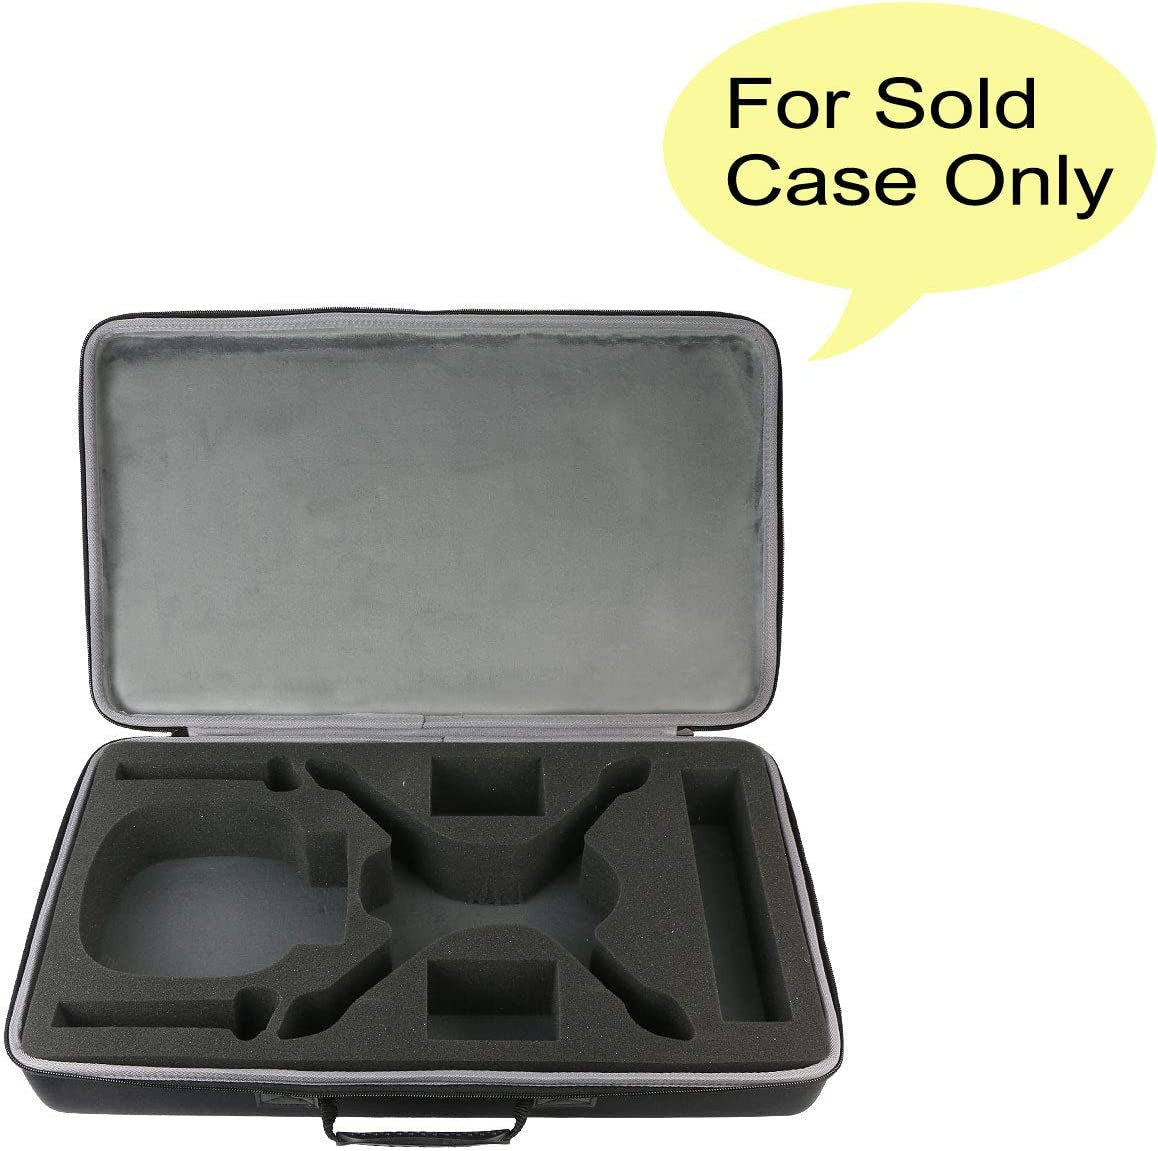 Hard Travel Case for Holy Stone HS700 FPV Drone (Black Case -Size 1)